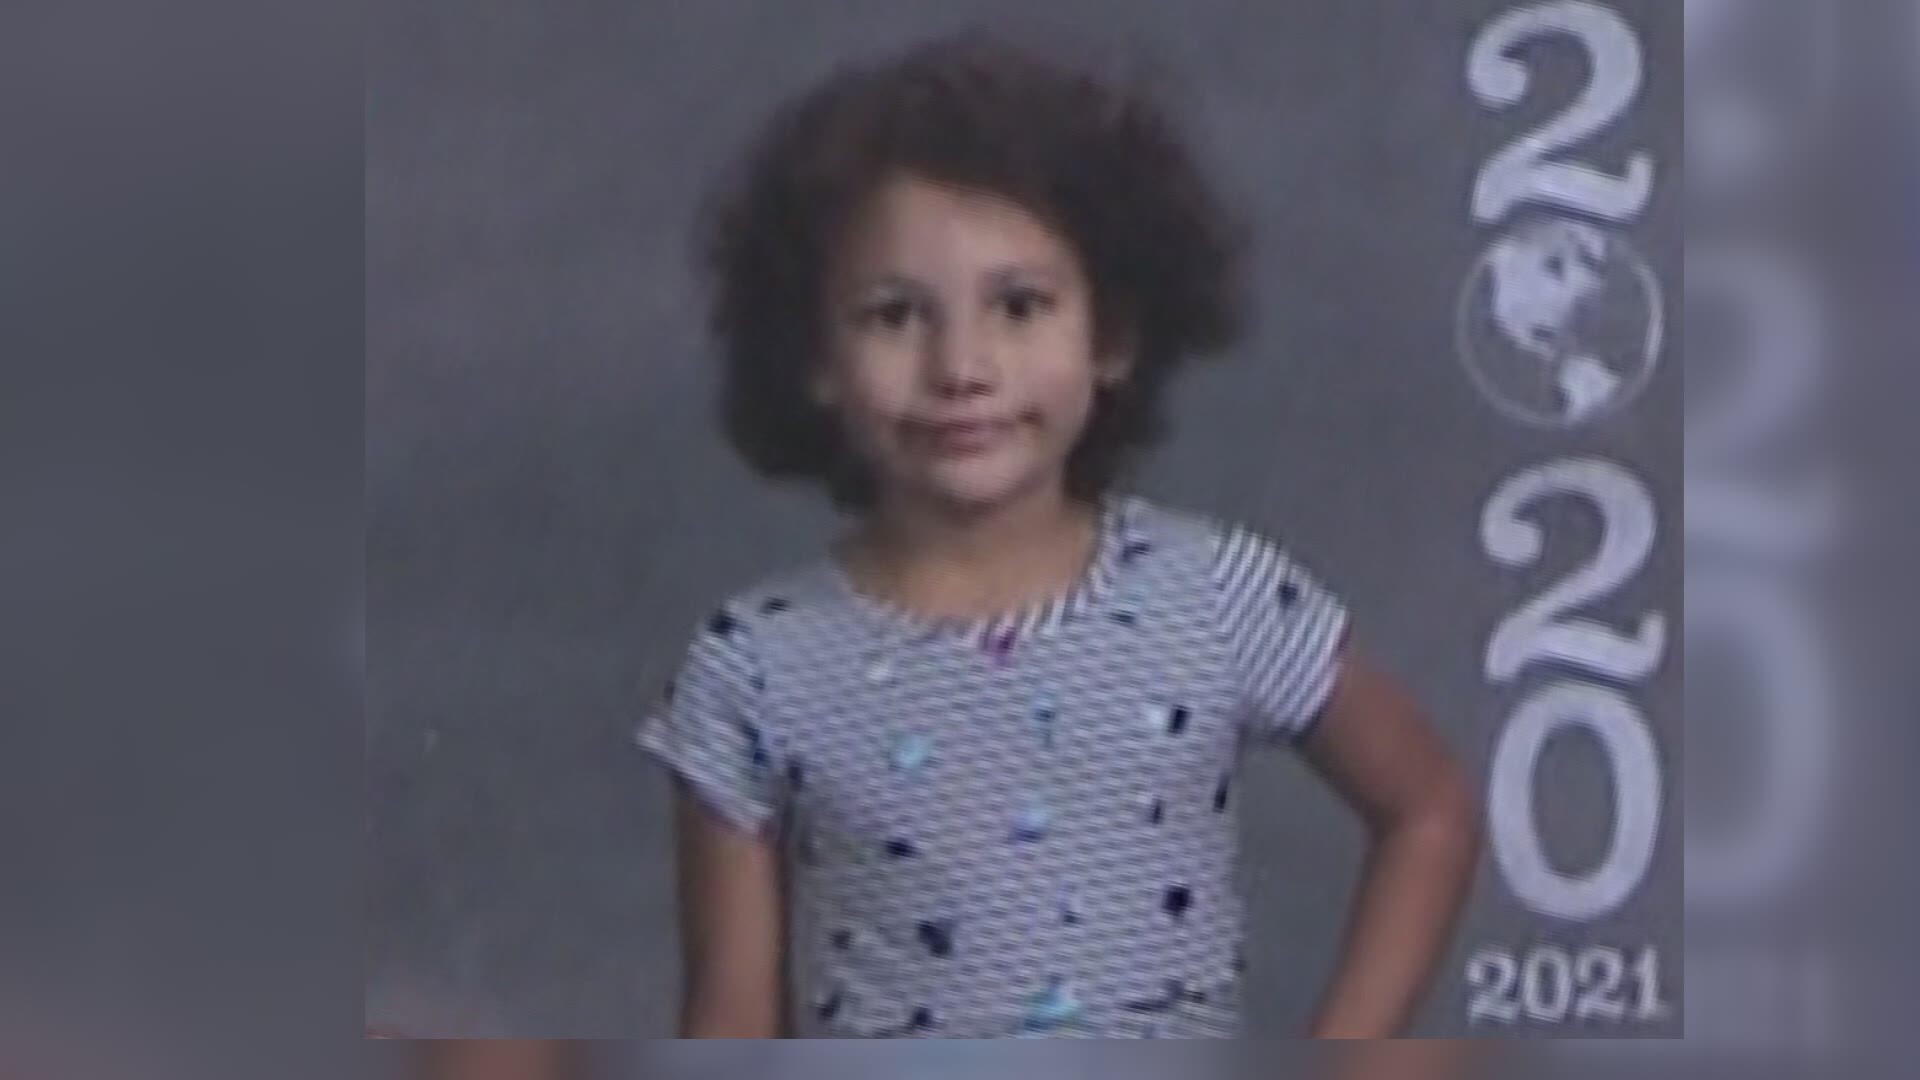 Grace Ross, 6, was found dead in the woods in New Carlisle, Indiana, with no clothes and blood smeared on her face.